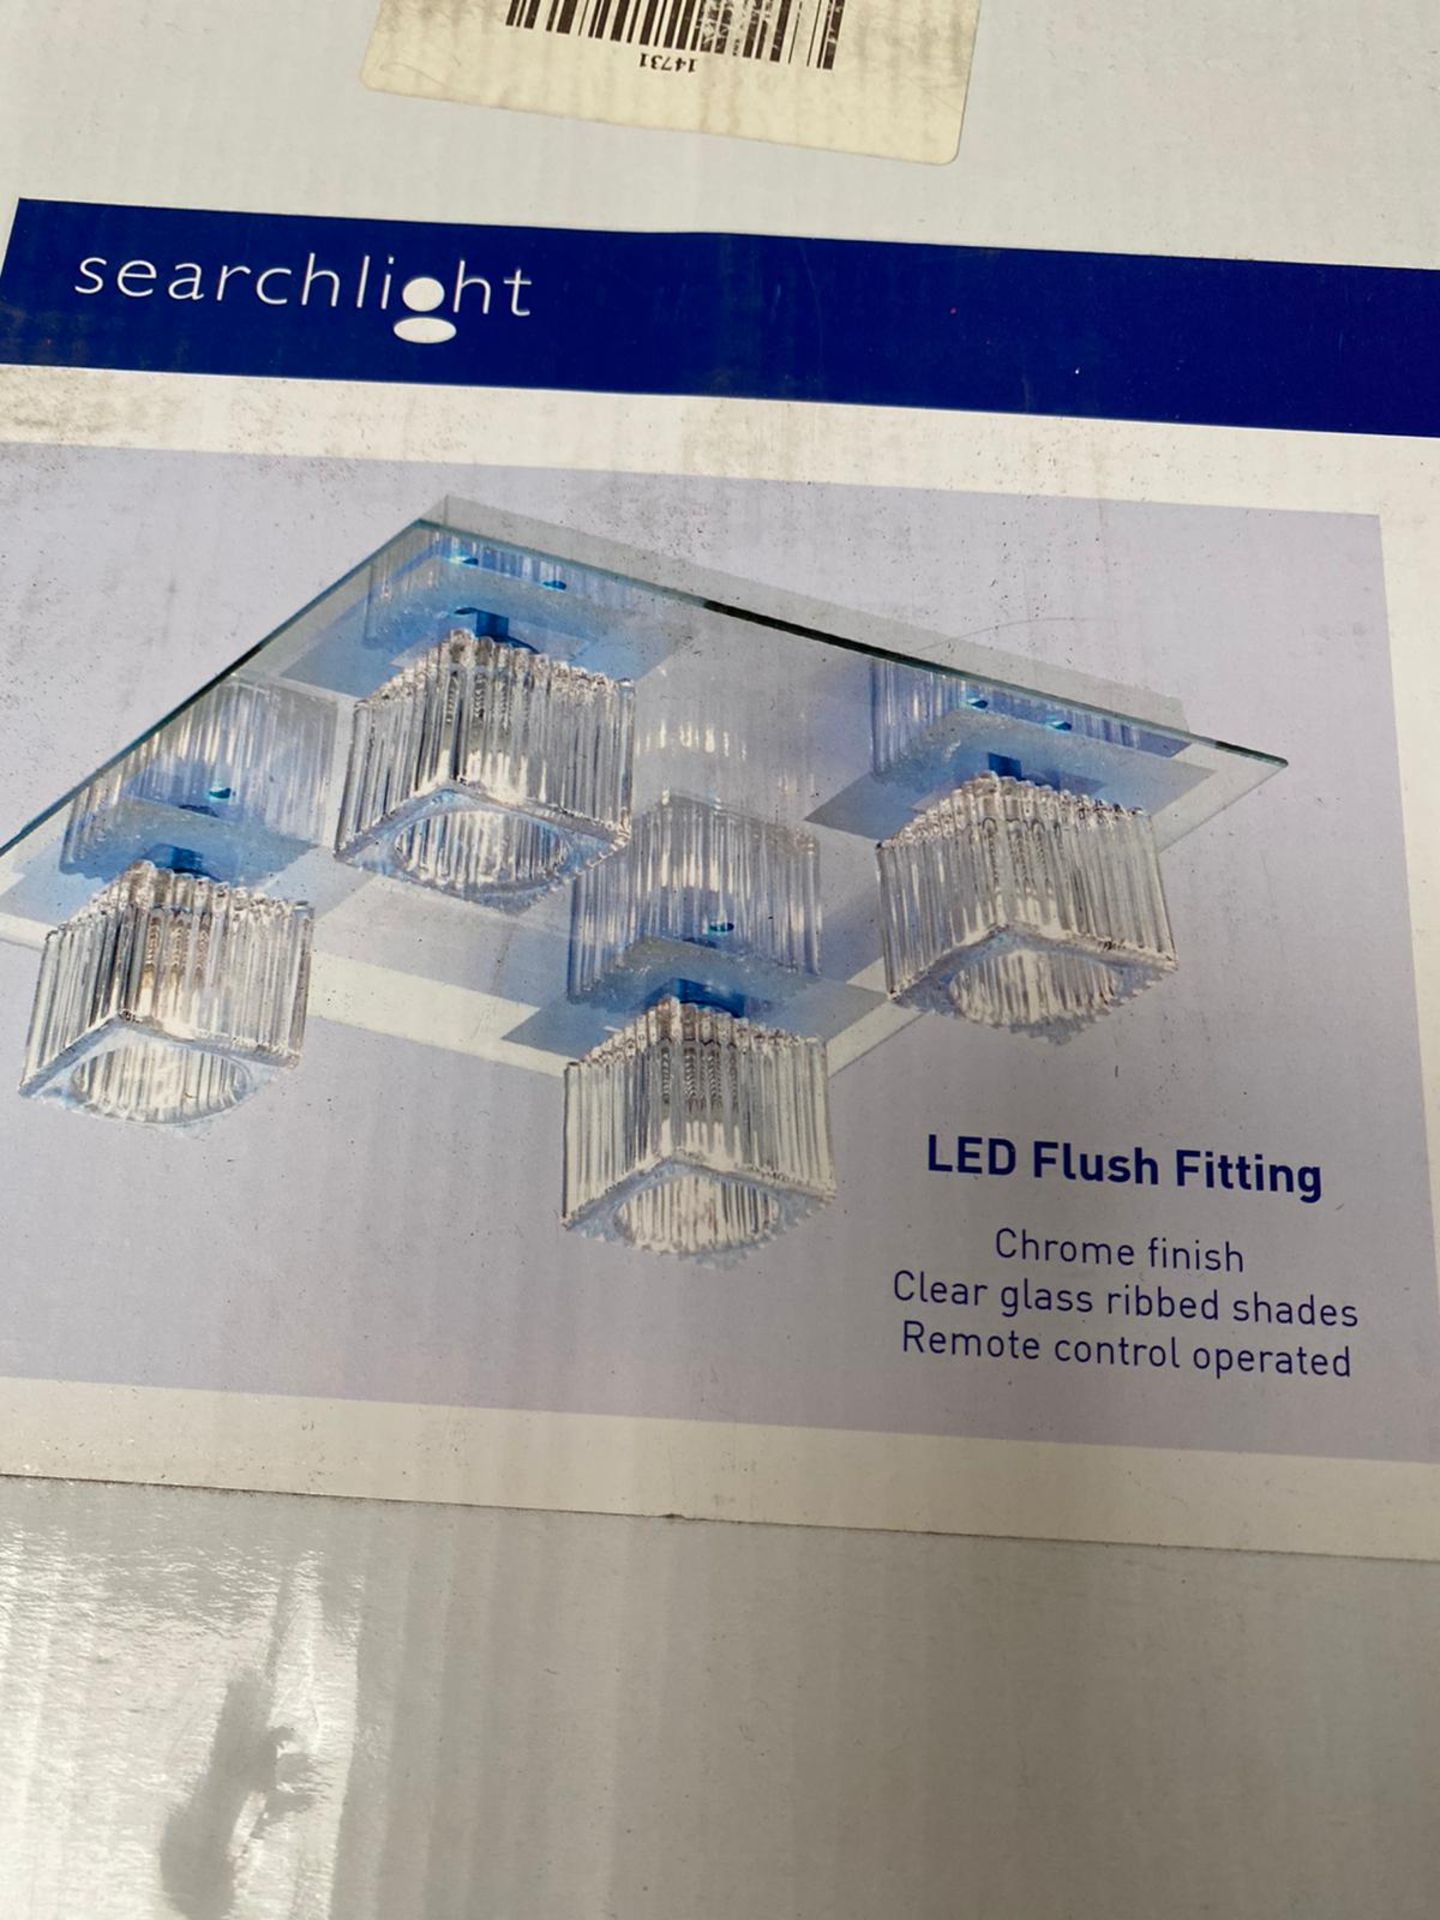 1 x Searchlight LED Flush Fitting in chrome - Ref: 1934-4CC- New and Boxed - RRP: £120 - Image 4 of 4